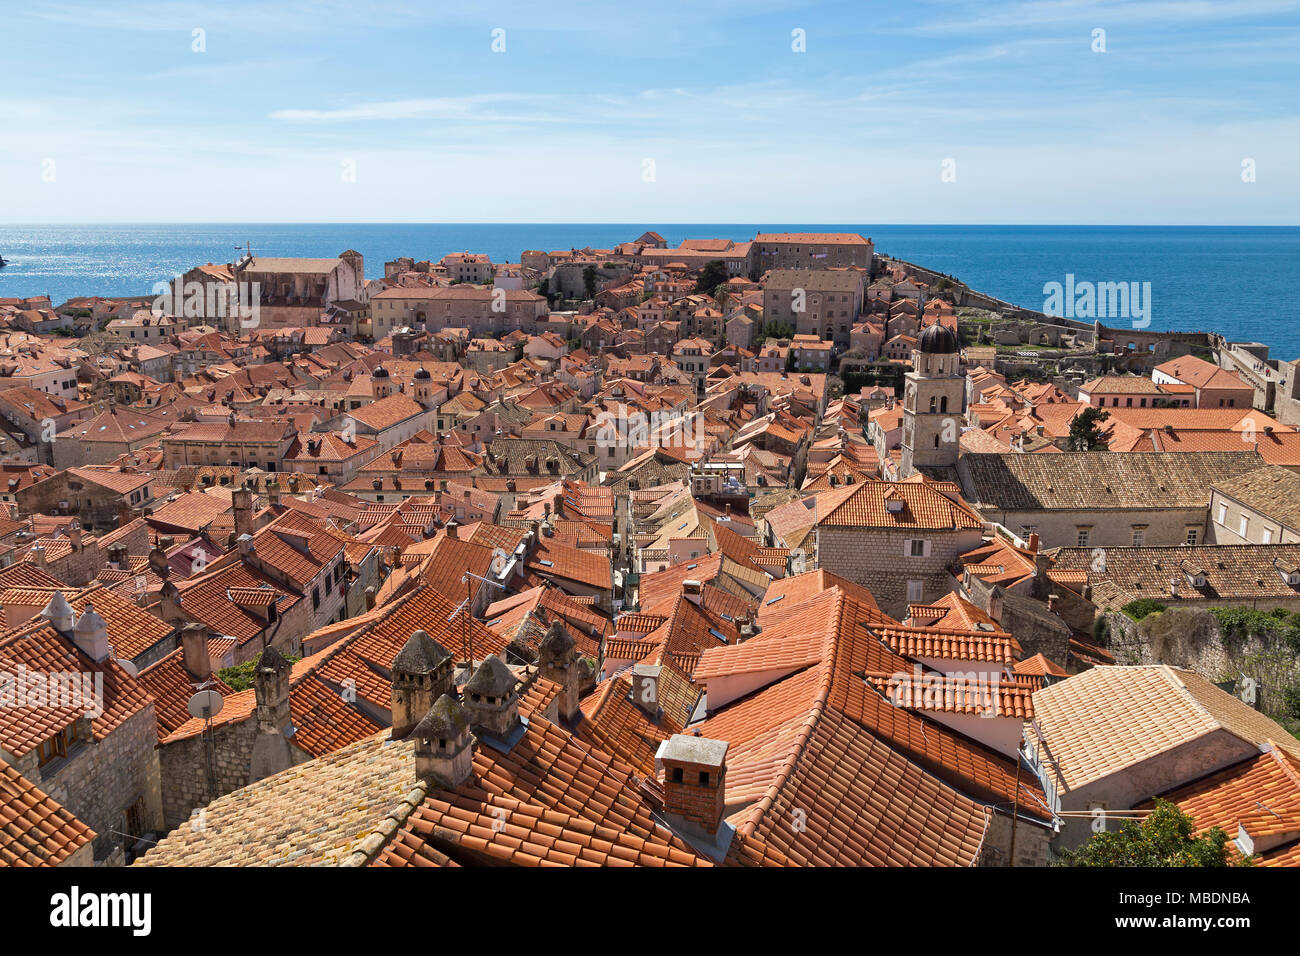 view of the old town from the town wall, Dubrovnik, Croatia Stock Photo